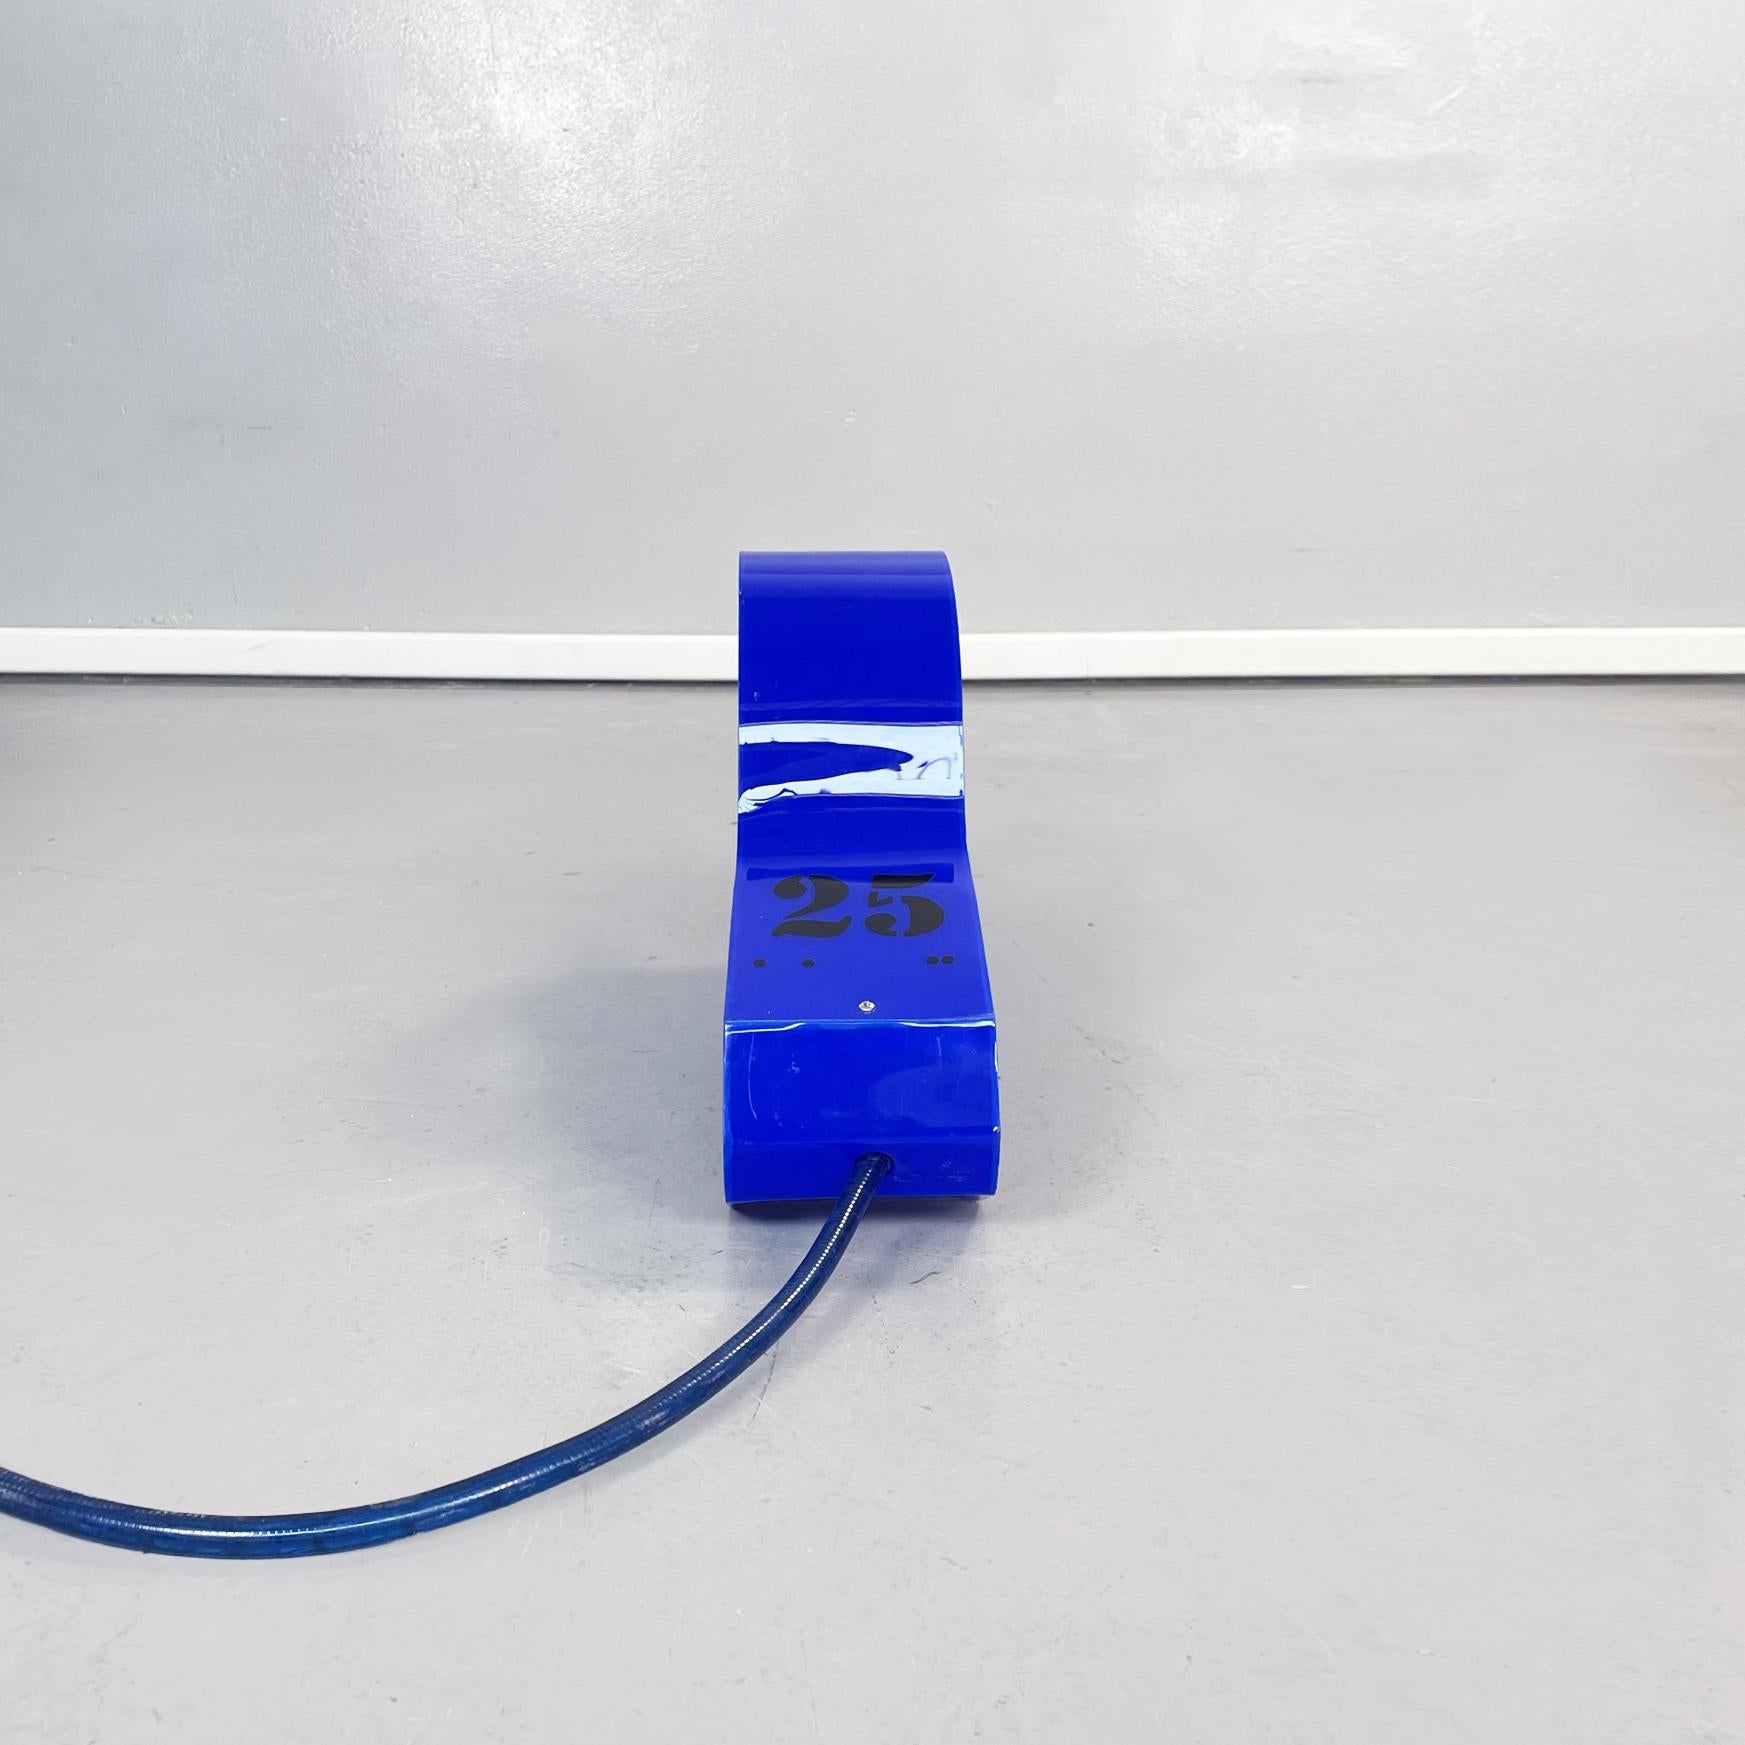 Contemporary Italian Post-Modern Whistle Led Table Lamp in Blue Plexiglass Marco Lodola, 2000 For Sale